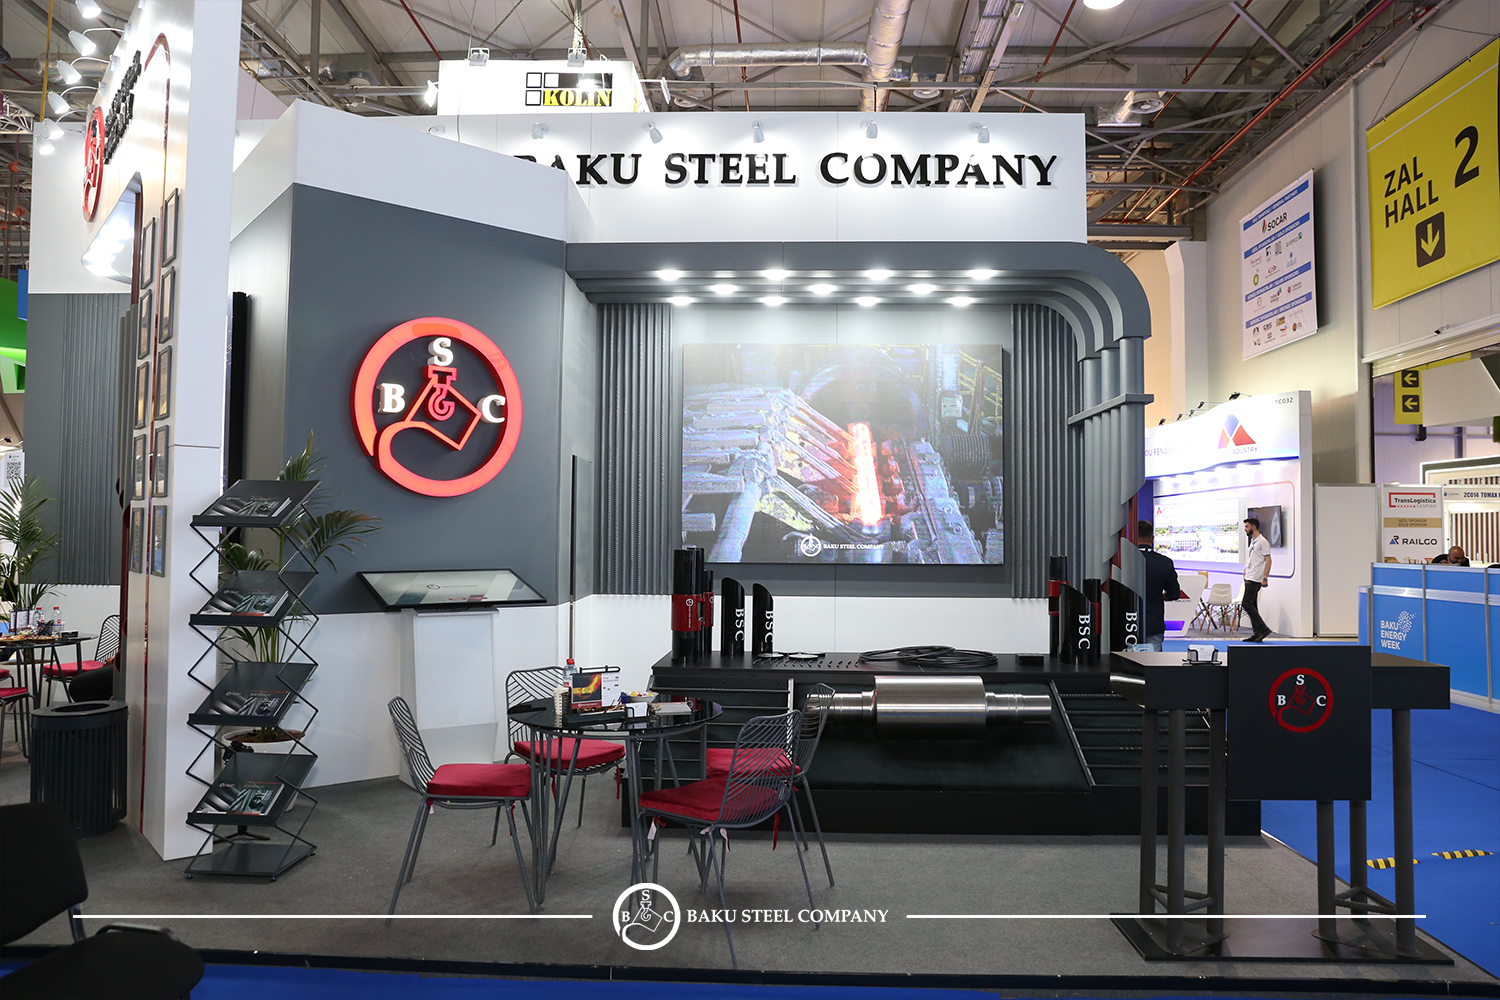 CJSC "Baku Steel Company" takes part at the 29th International Exhibition "Caspian Oil and Gas" (PHOTO/VIDEO)